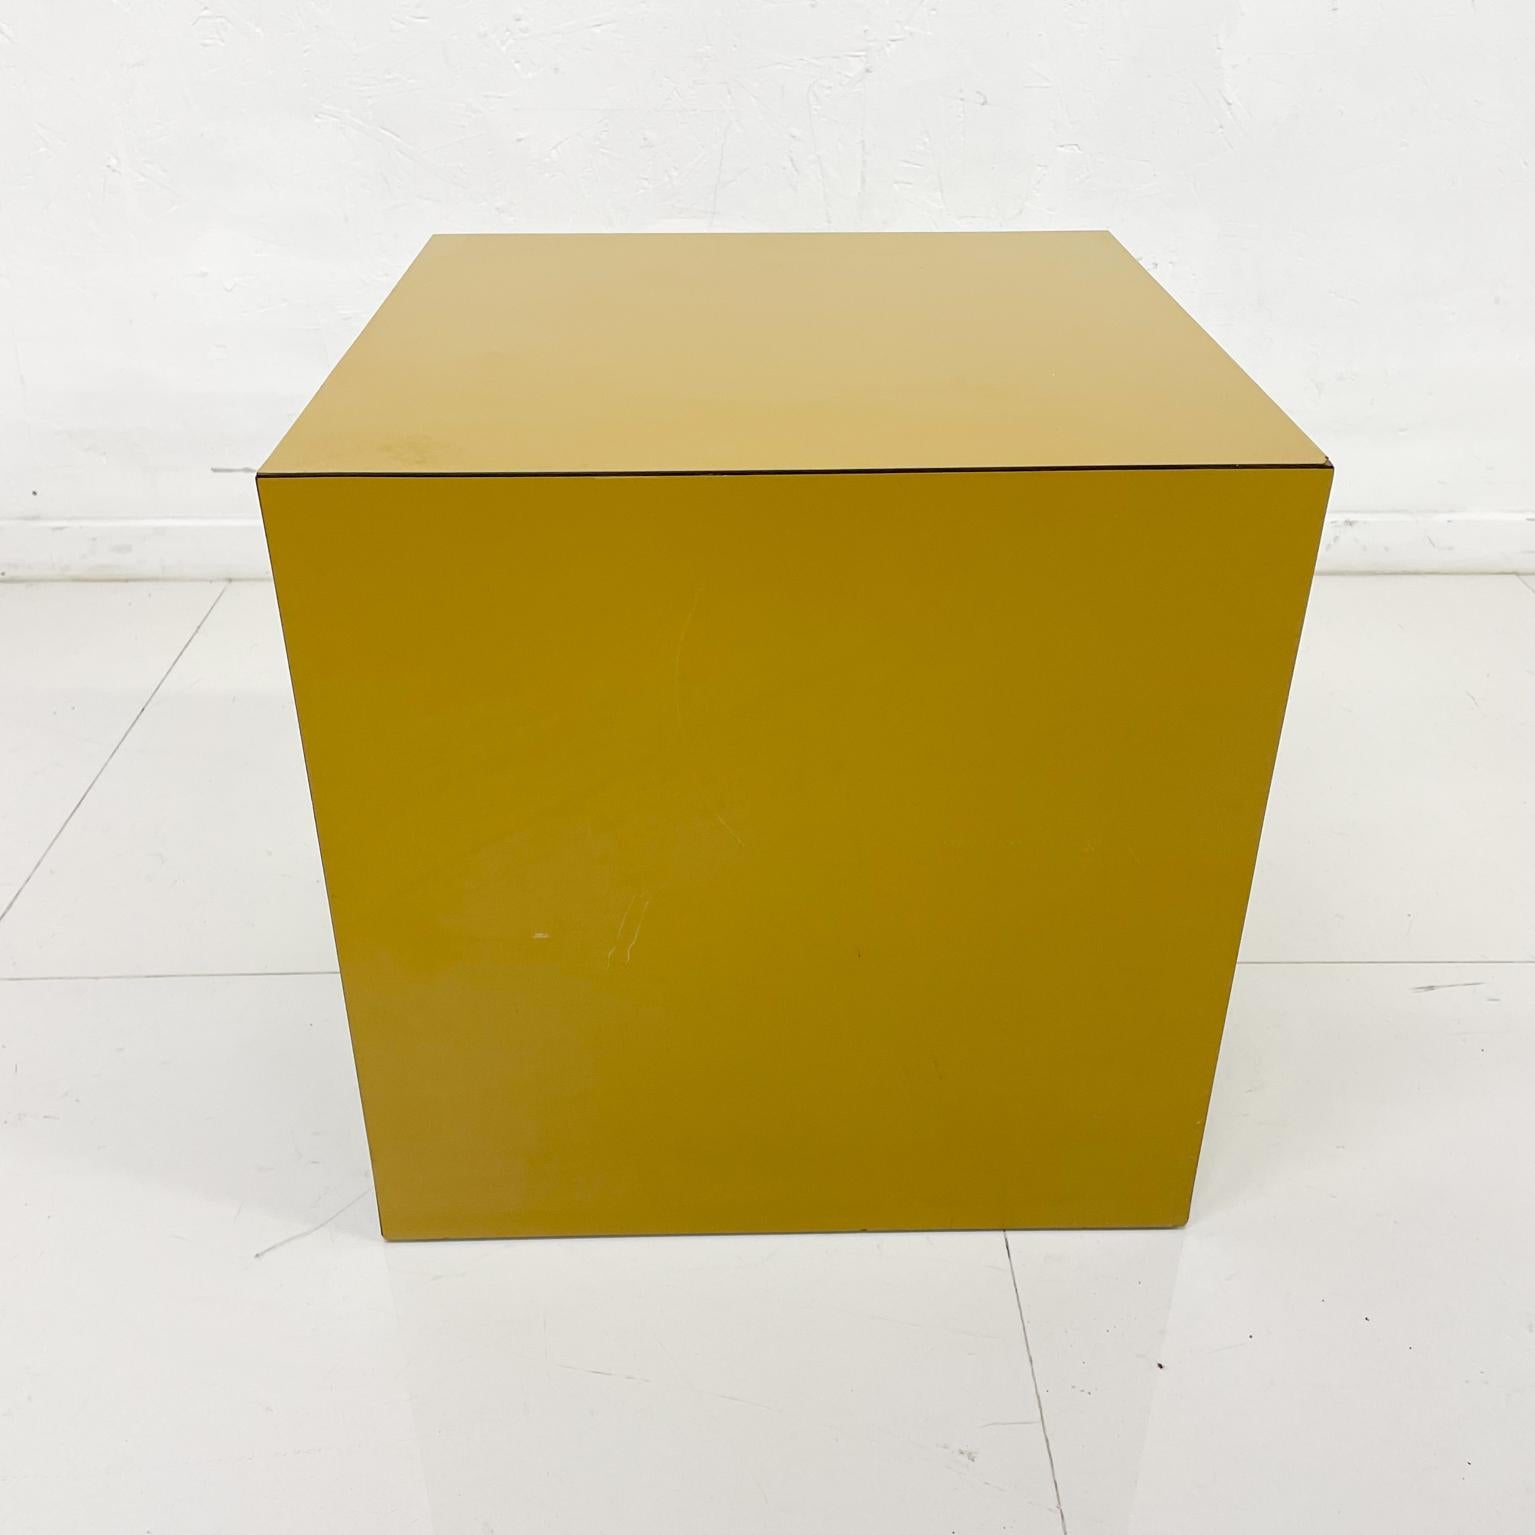 Cube table
1970s Mid-Century Modern made in the USA. Side end table covered in Formica- Perfect Cube. Mustard color.
No label. Inscription on inside with black marker.
Size 15.63 cube
Overall good preowned unrestored condition. One corner has